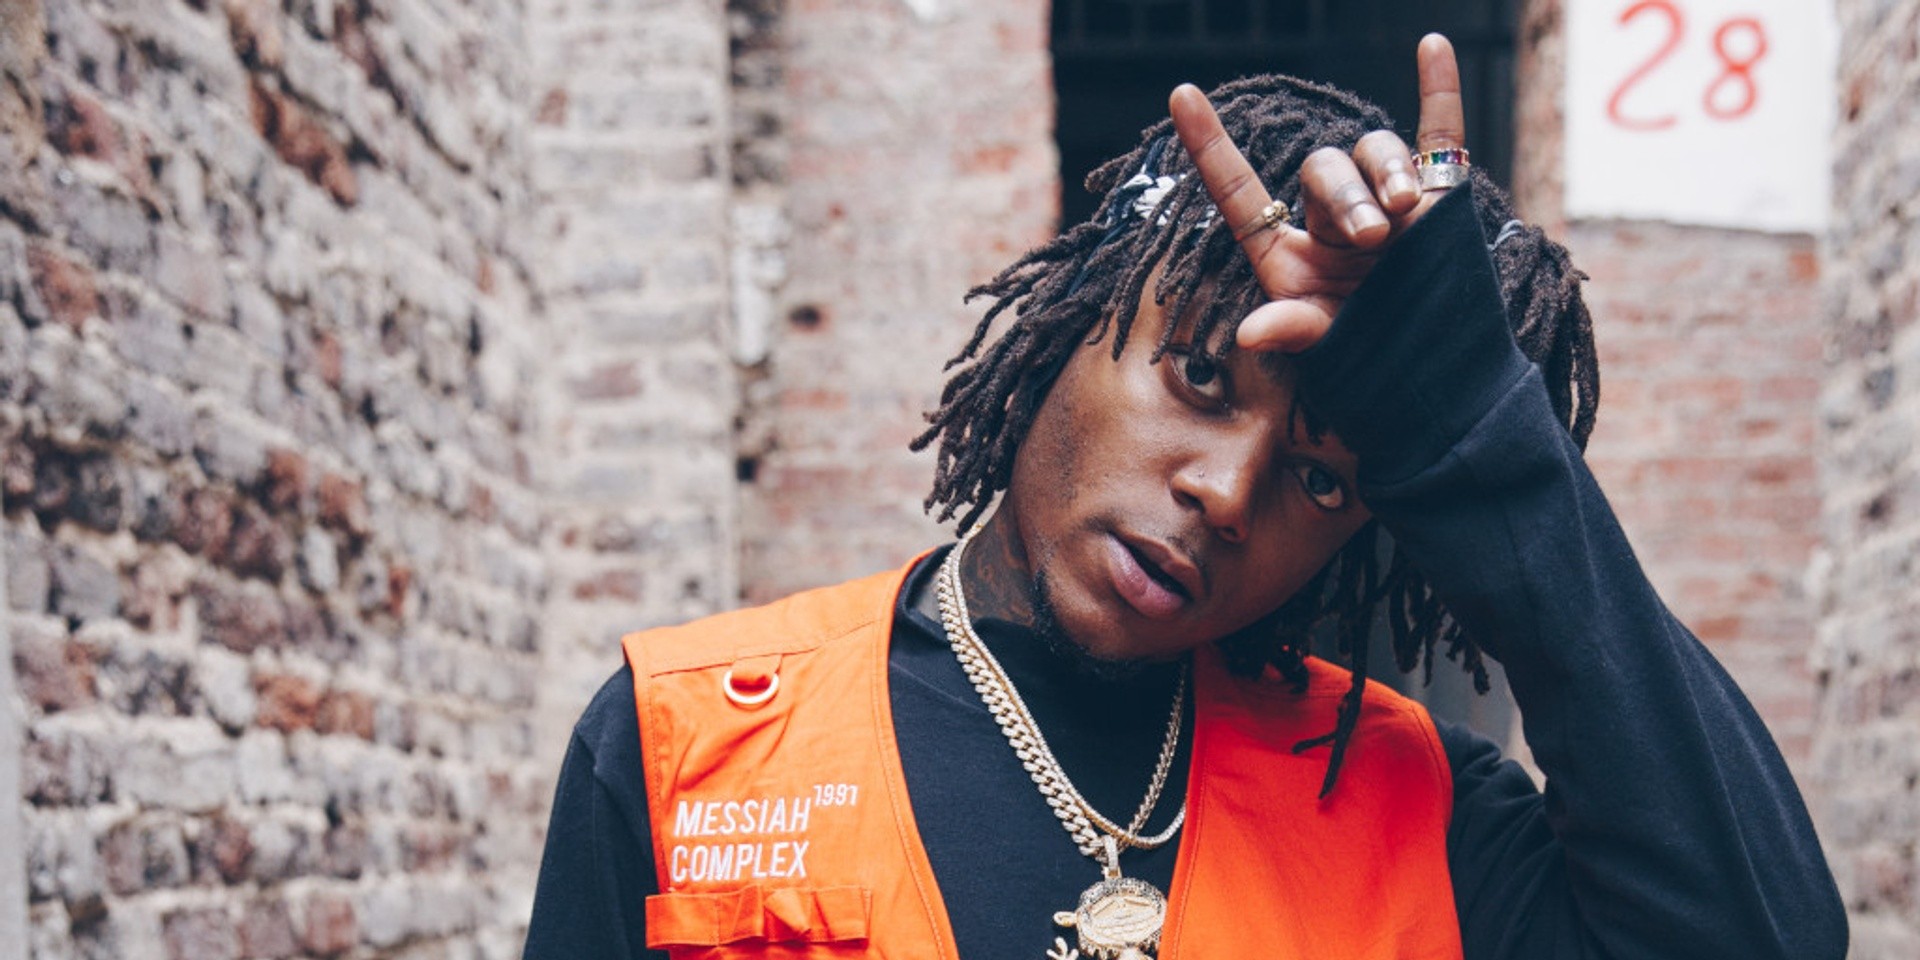 "You have to train, sharpen your sword, and just try to be the best version of yourself": J.I.D on making it in the music industry and adapting to a post-pandemic world